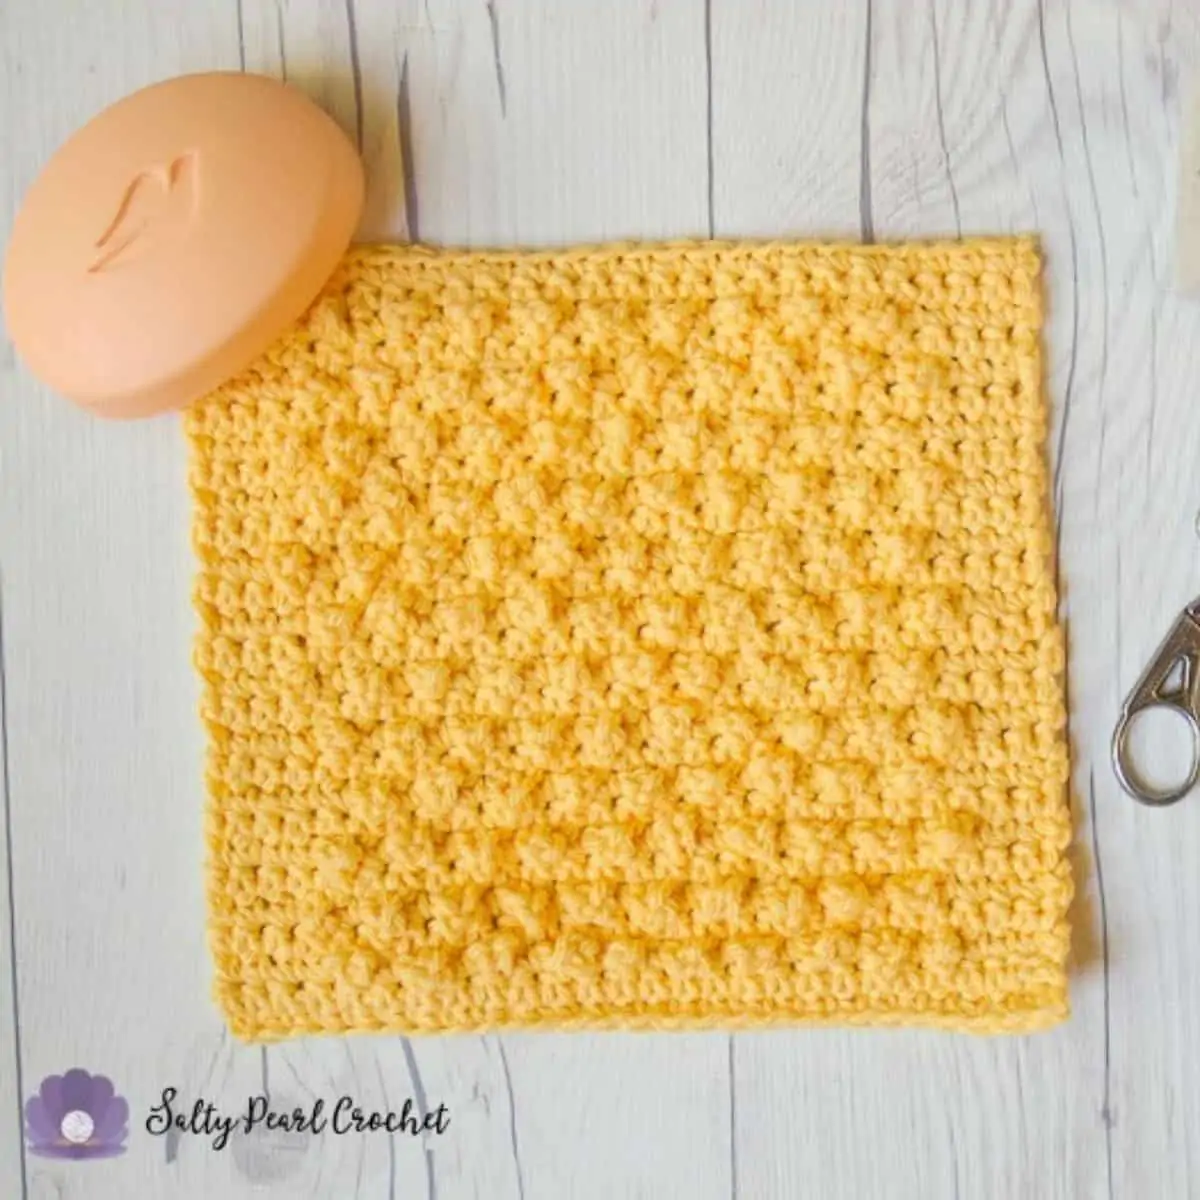 yellow crochet dishcloth laying flat with a bar of soap on top